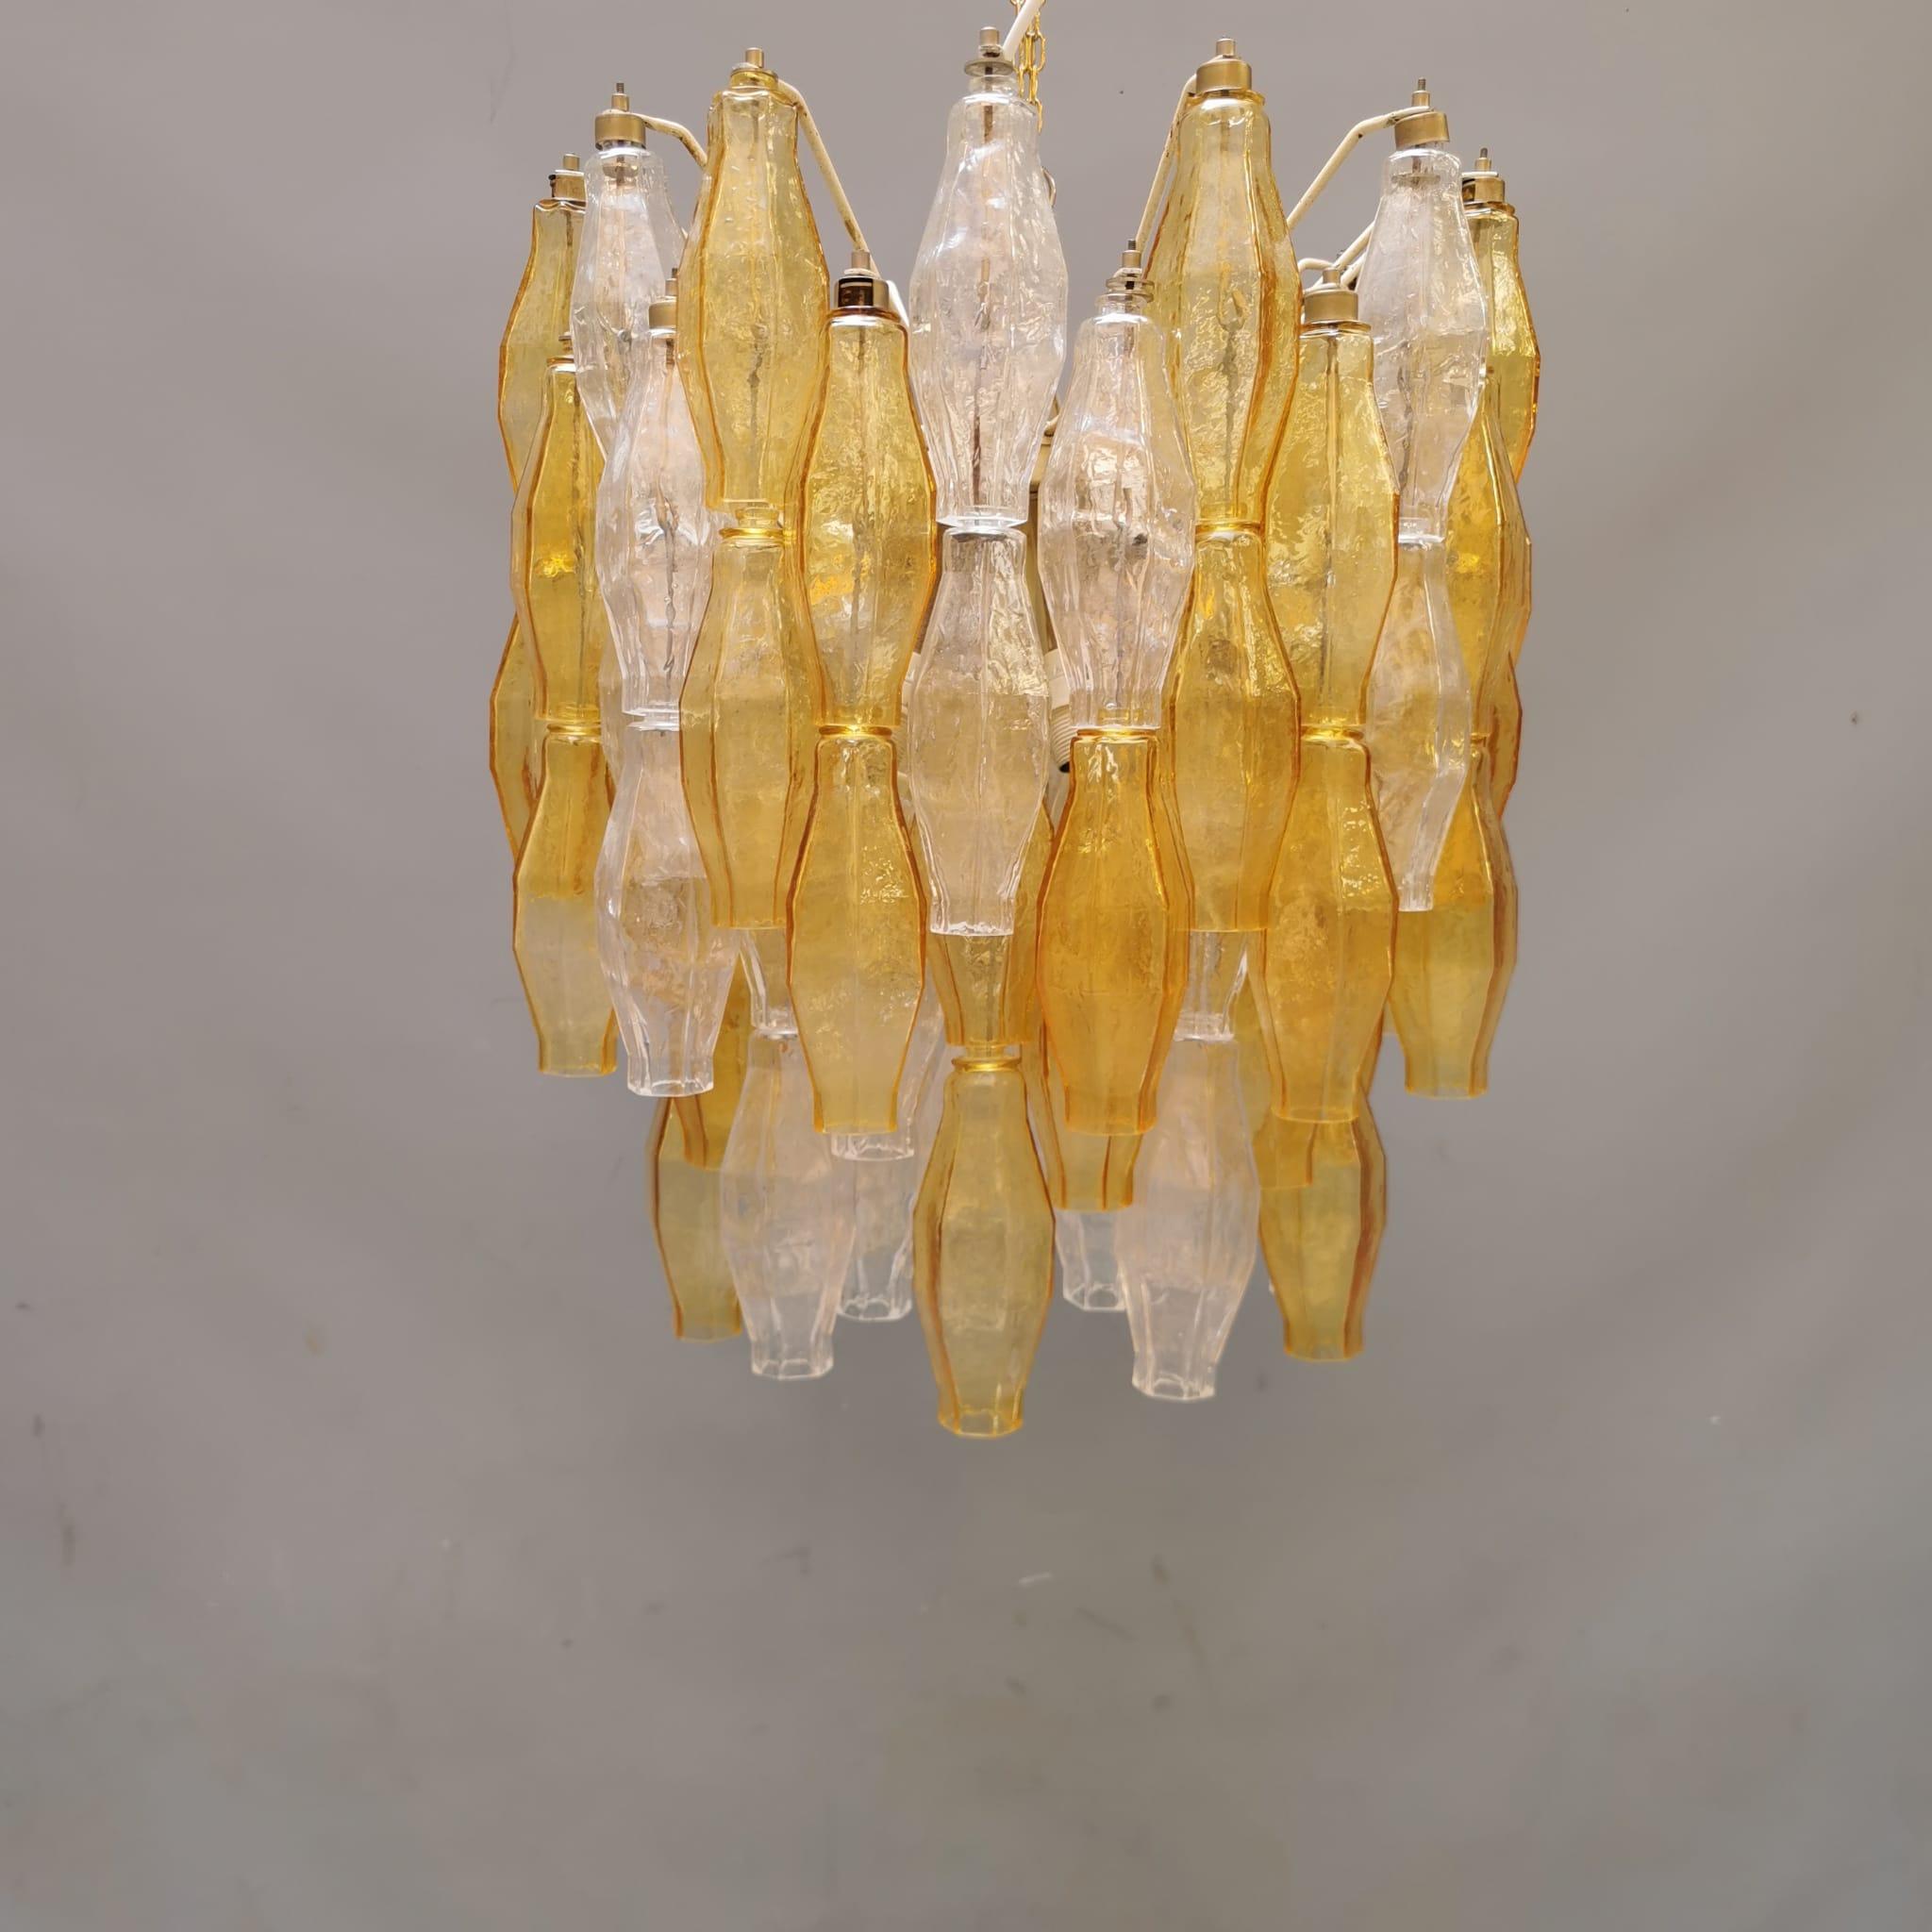 Poliedri is a modular glass chandelier designed by Carlo Scarpa for Venini. In 1958 the chandelier triumphed at the Expo in Brussels, at the centre of the Italian pavilion. Since then its infinitely glittering appearance of polyhedrons has continued